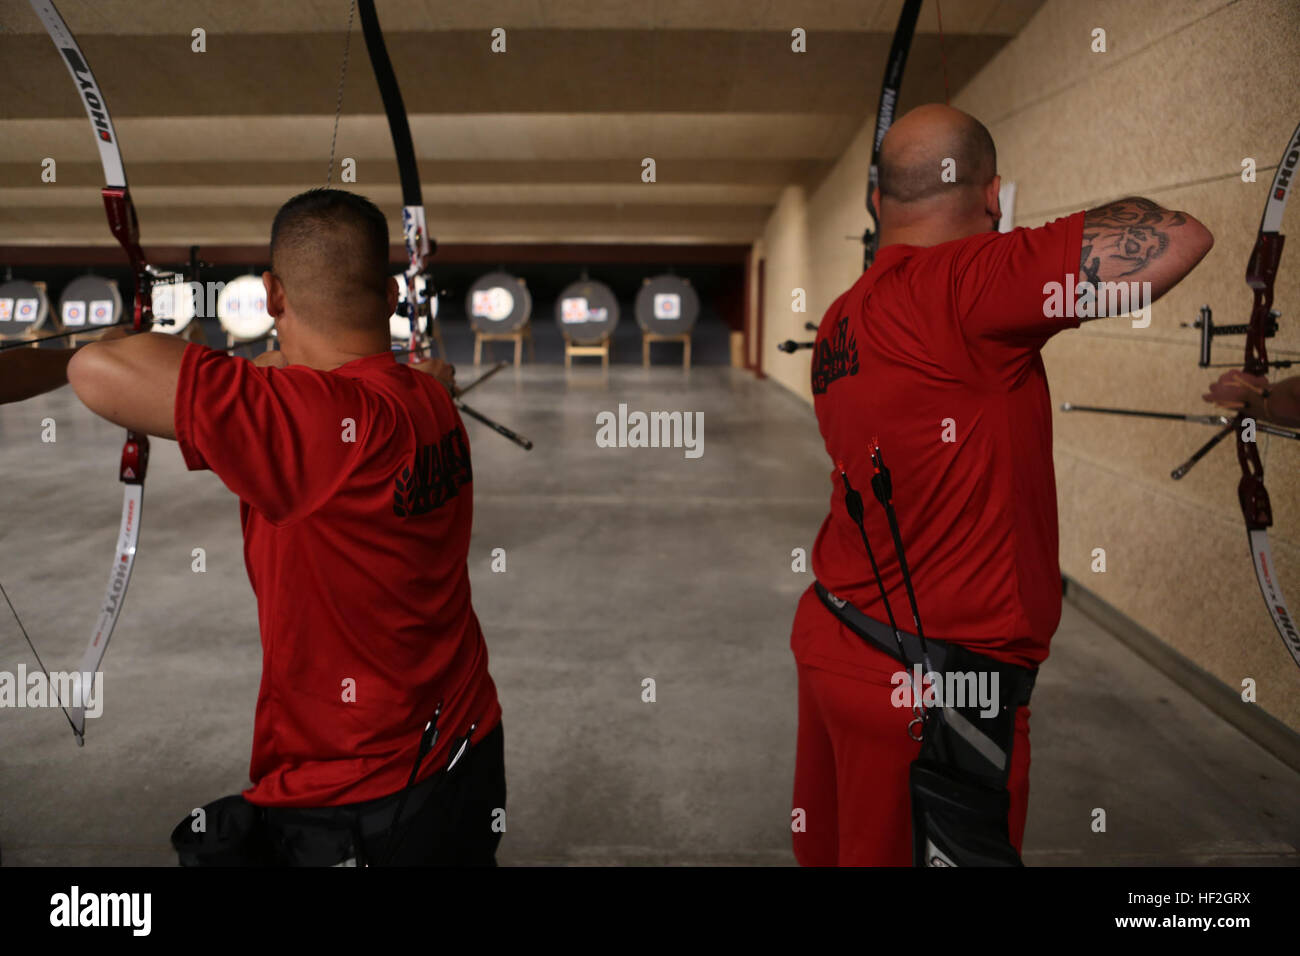 Capt. Chris McGleinnaiss, from Kailua, Hawaii, and teammate Sgt. Andres Burgos, from Orlando, Florida, draw back and prepare to release arrows during archery practice for the Marine team, September 25, in preparation for the 2014 Warrior Games. The Marine team has been training since September 15 in order to build team cohesion and acclimate to the above 6,000 ft. altitude of Colorado Springs.  The Marine team is comprised of both active duty and veteran wounded, ill and injured Marines who are attached to or supported by the Wounded Warrior Regiment, the official unit of the Marine Corps char Stock Photo